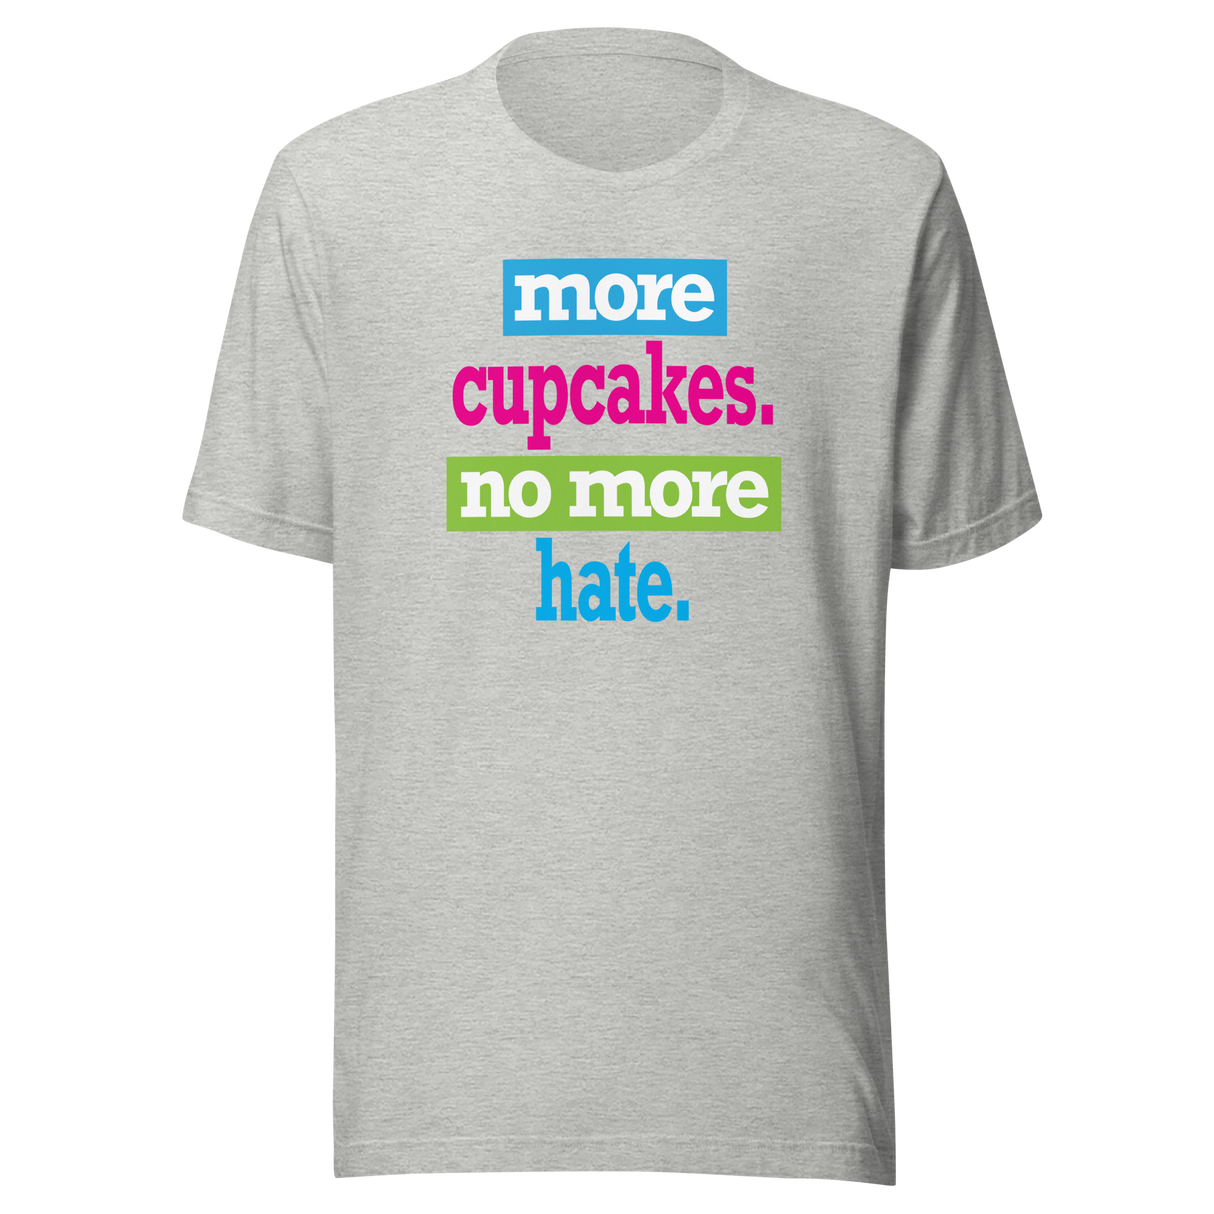 more-cupcakes-less-hate-live-tee-love-t-shirt-laugh-tee-t-shirt-tee#color_athletic-heather